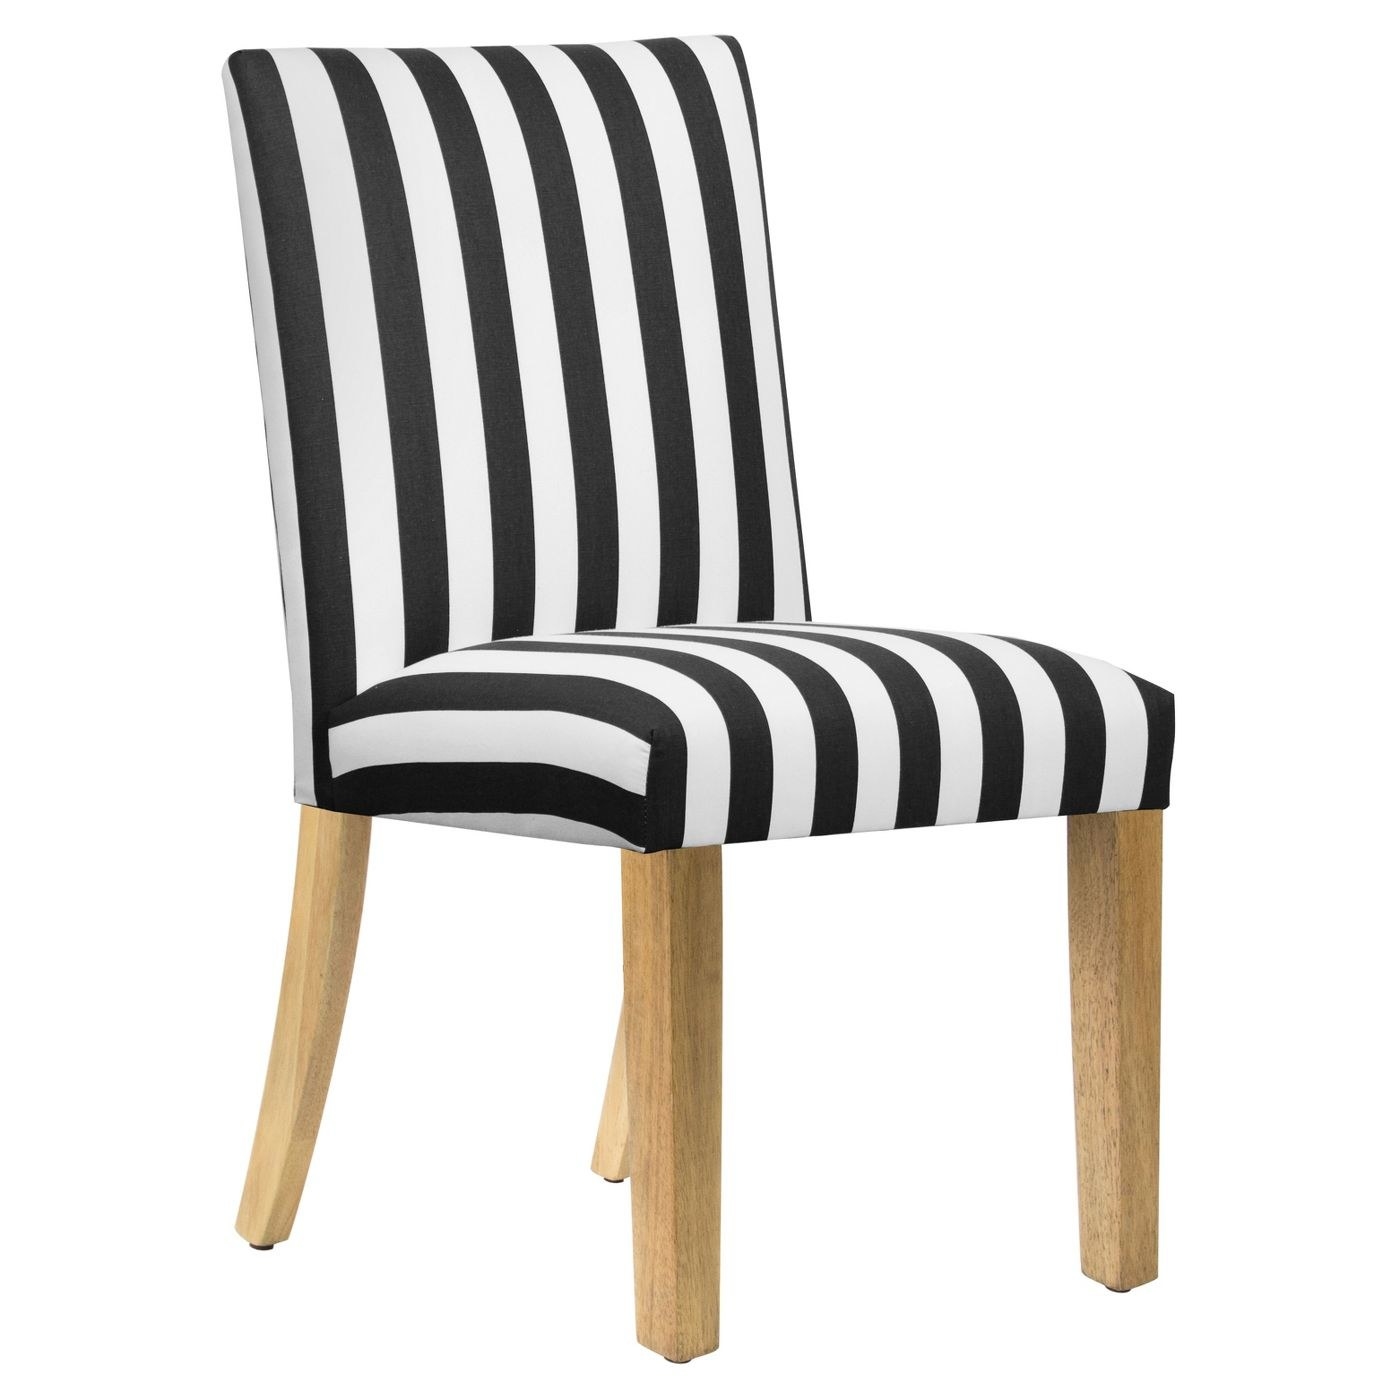 Upholstered black and white chair with lightwood legs